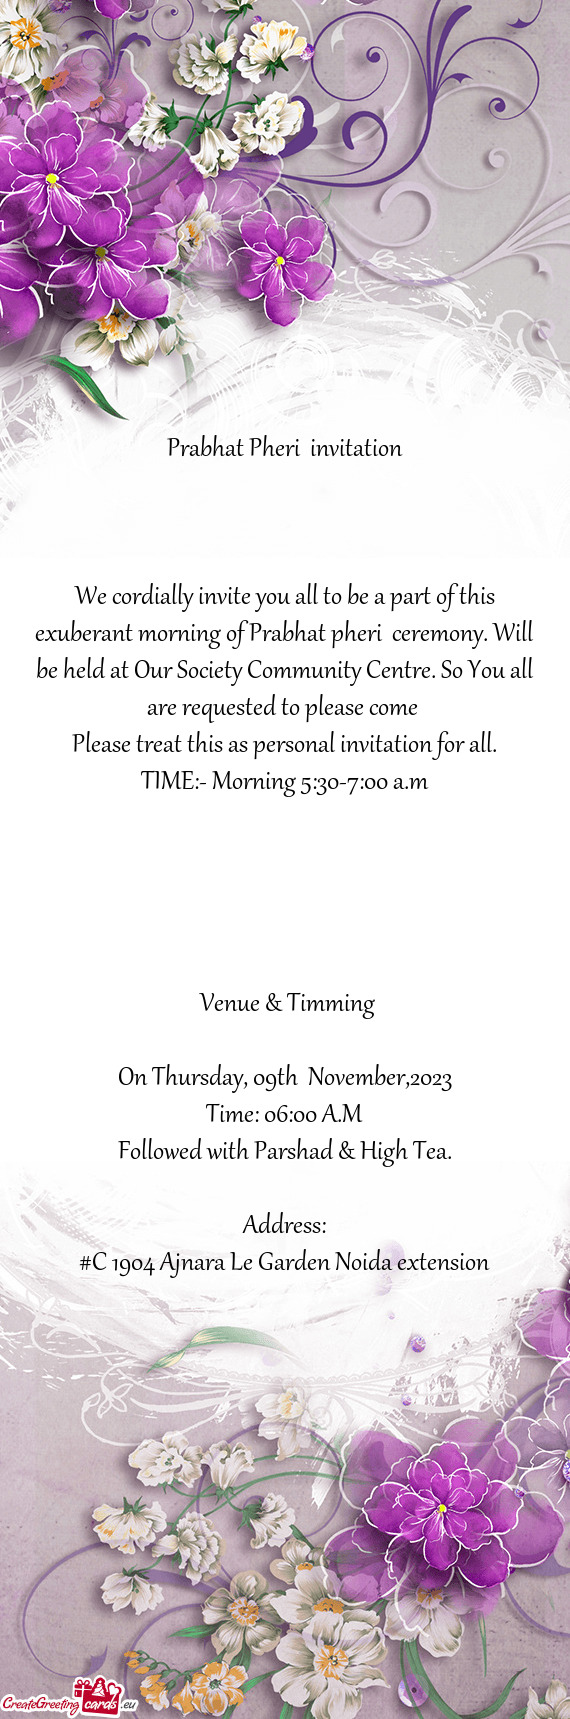 Be held at Our Society Community Centre. So You all are requested to please come